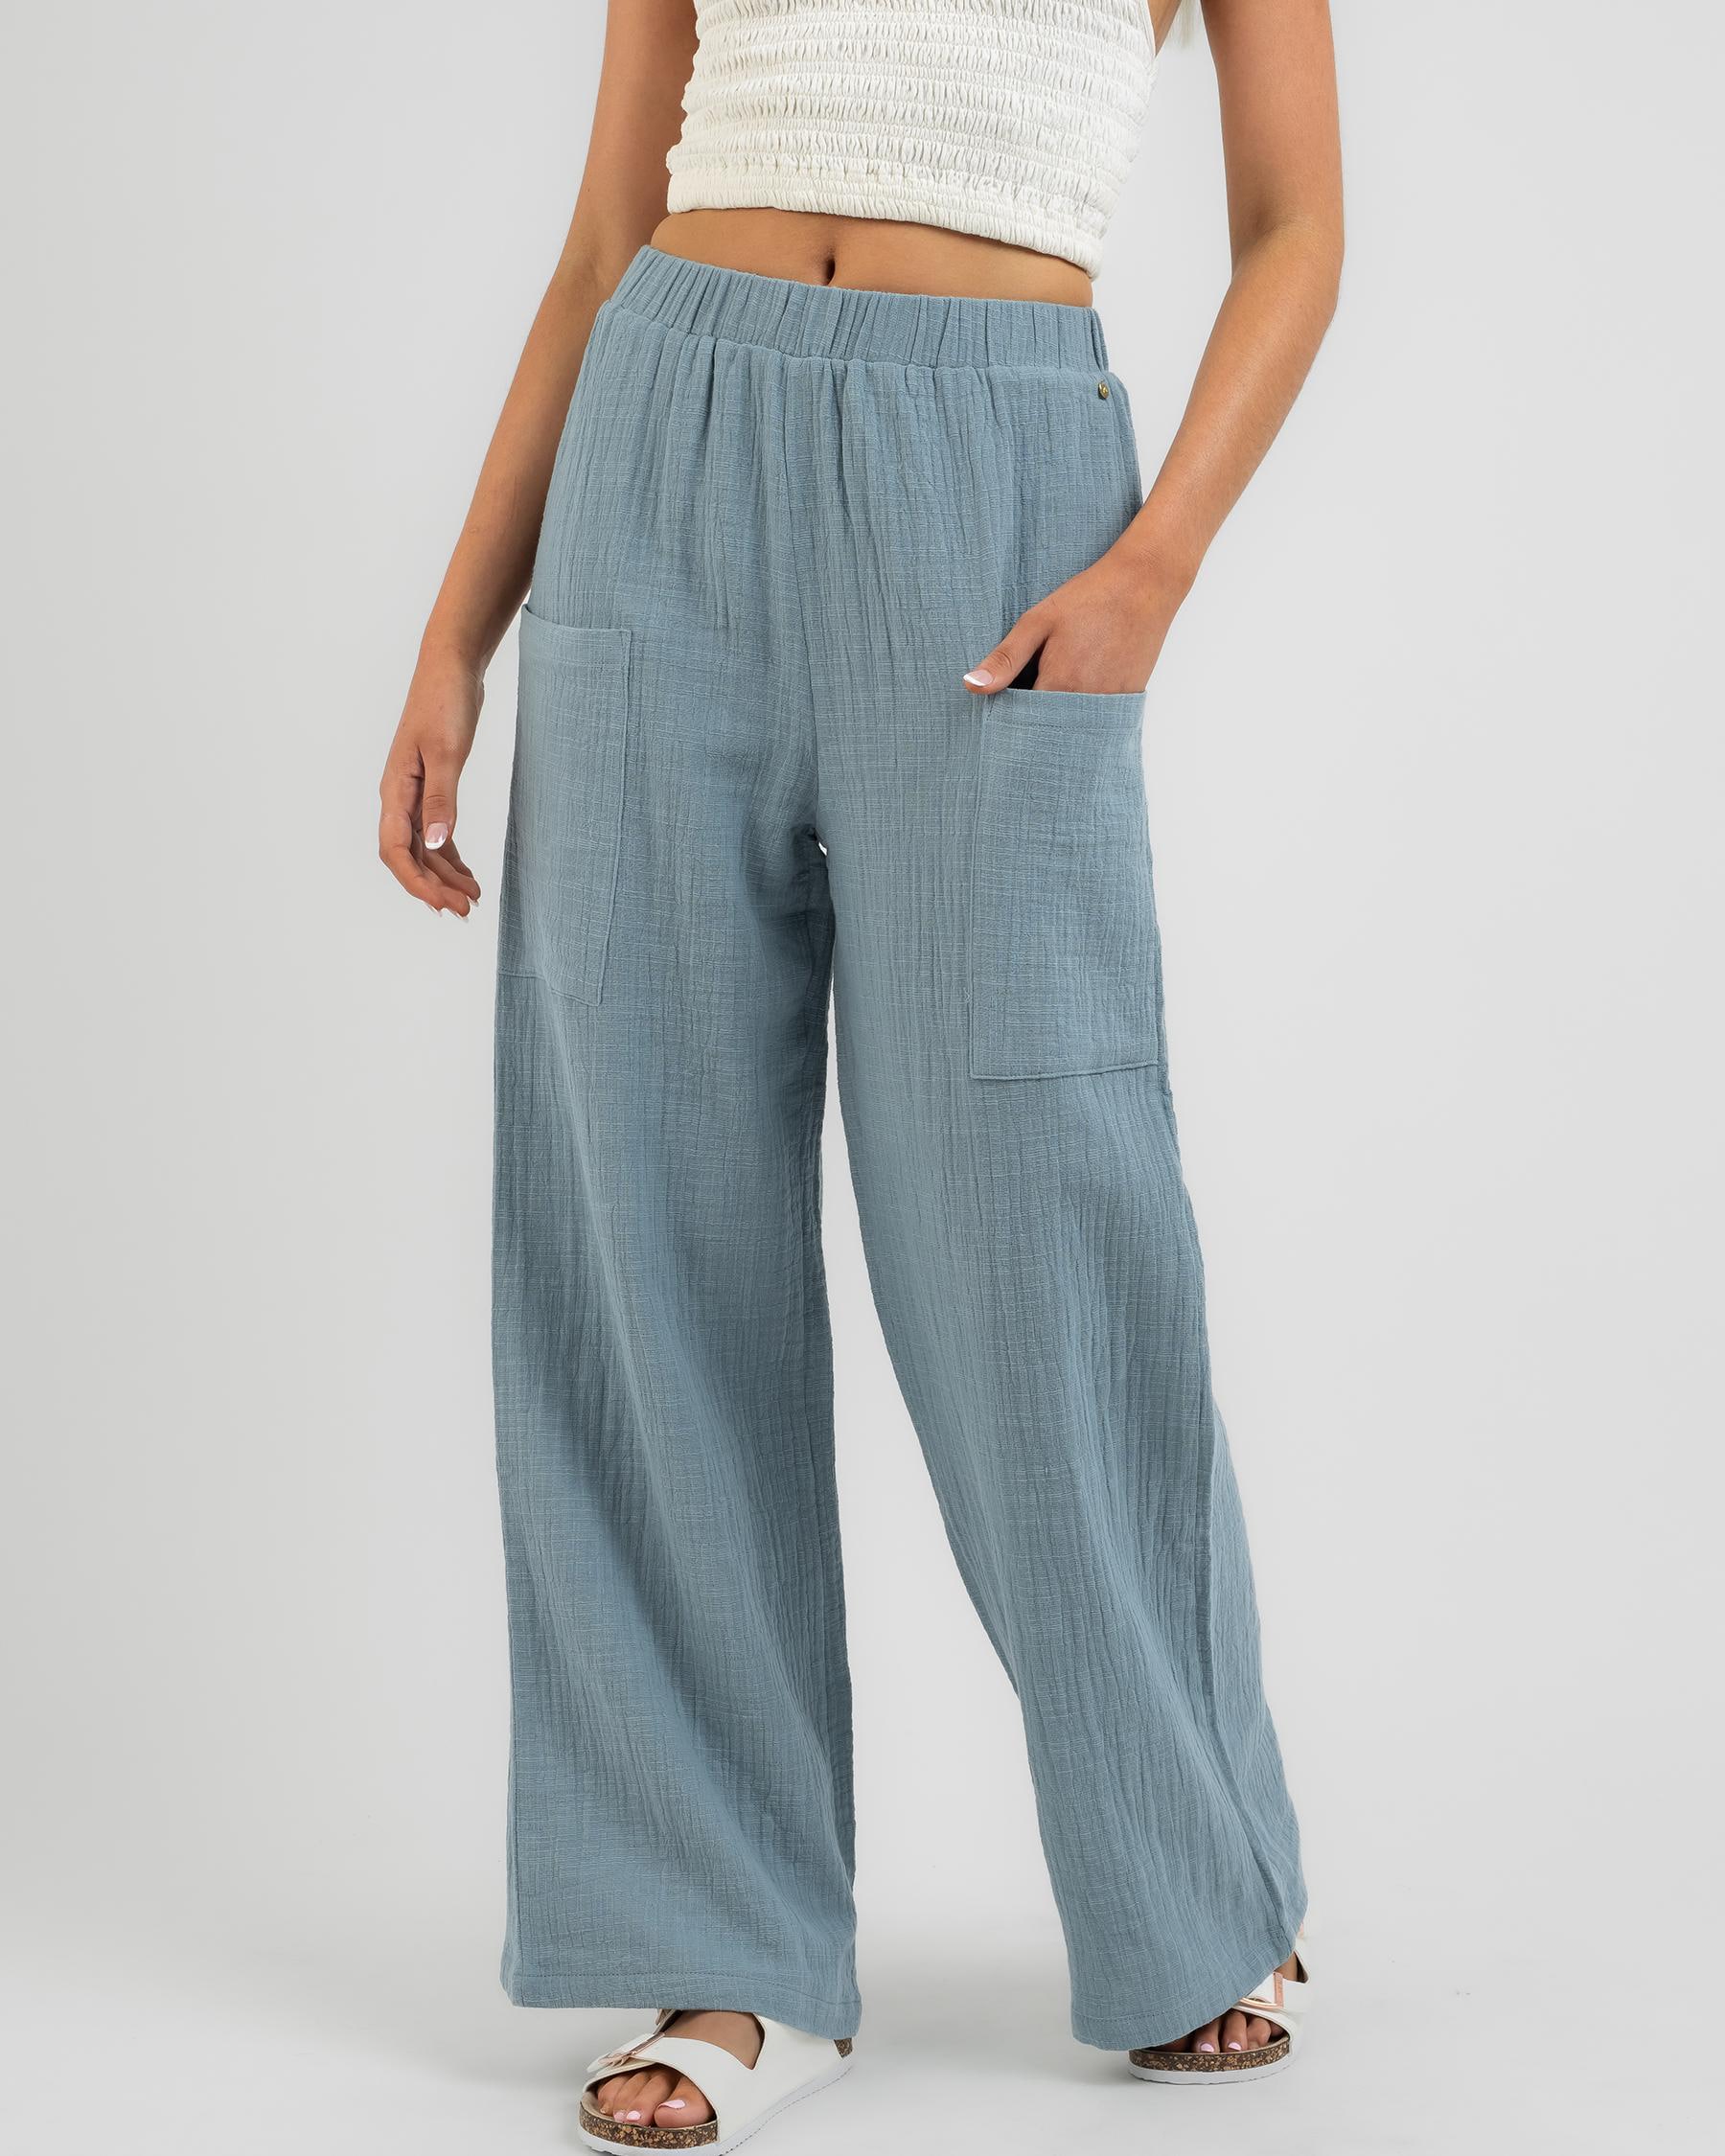 Rusty Somewhere Beach Pants In Dusty Blue - Fast Shipping & Easy ...